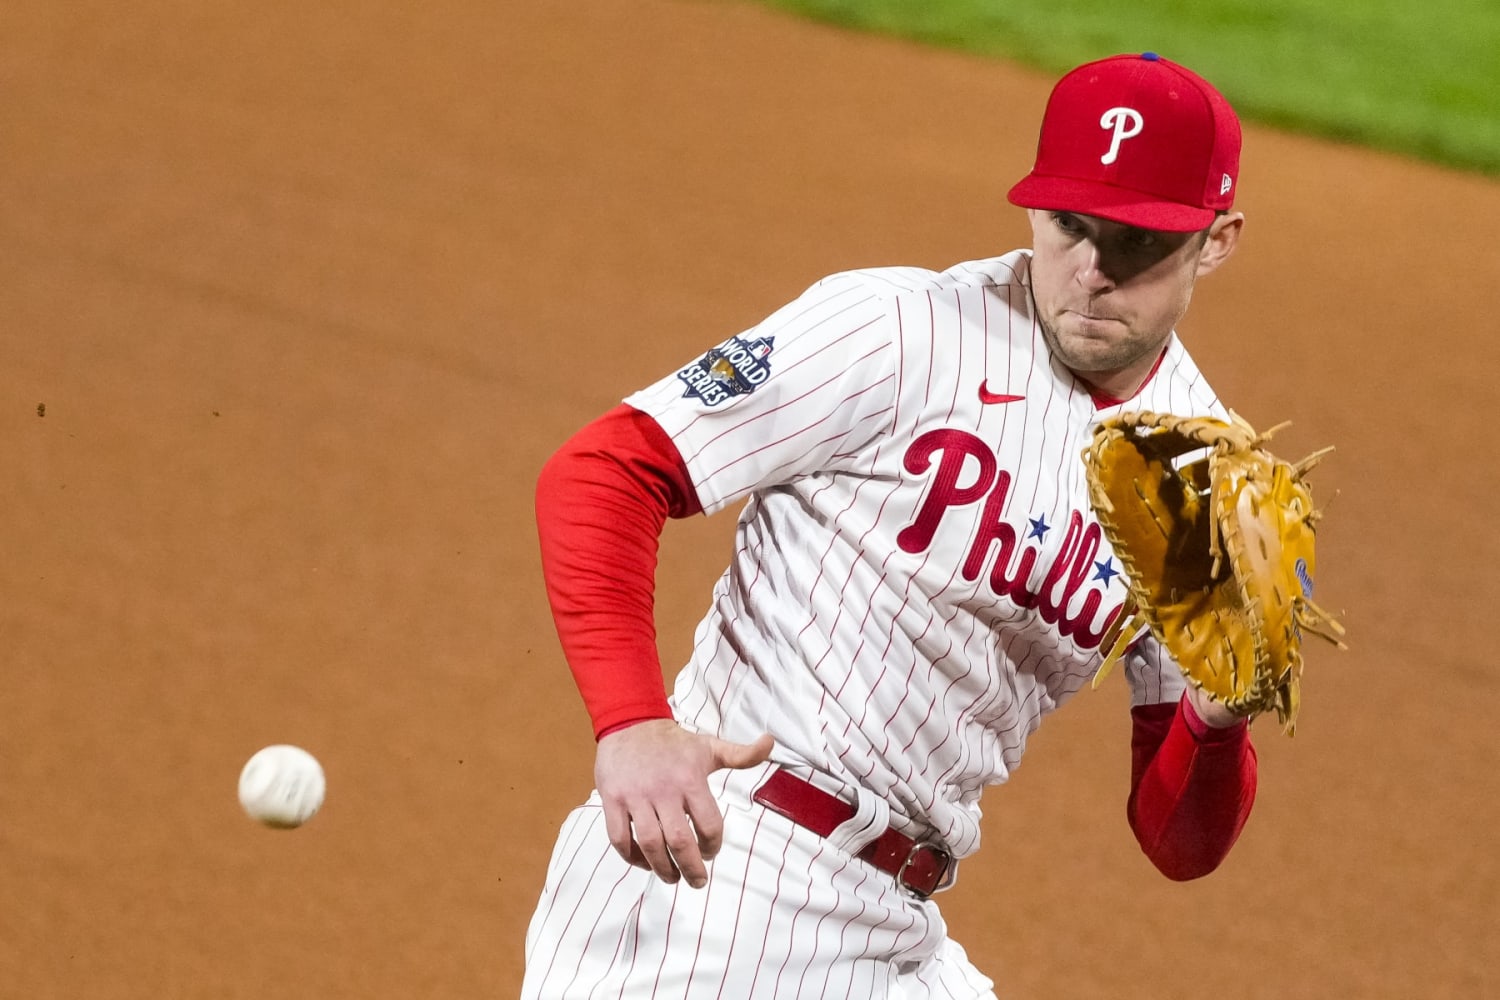 Rhys Hoskins homers again to lead Phillies past slumping Marlins